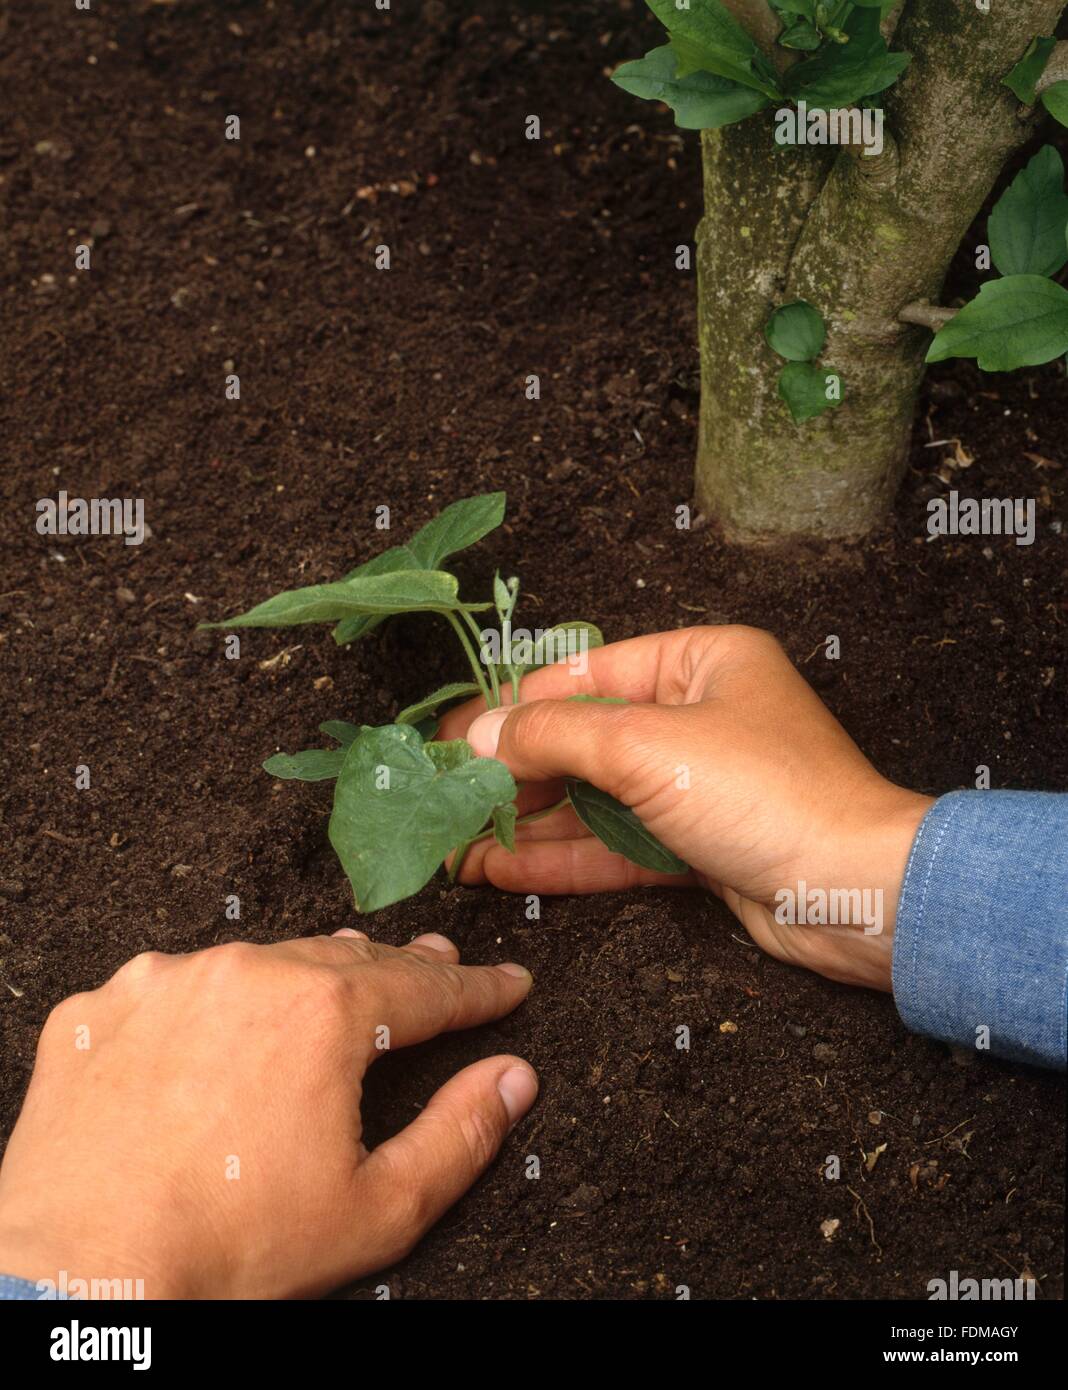 Planting out Ipomea at a distance form the host's stem, close-up Stock Photo